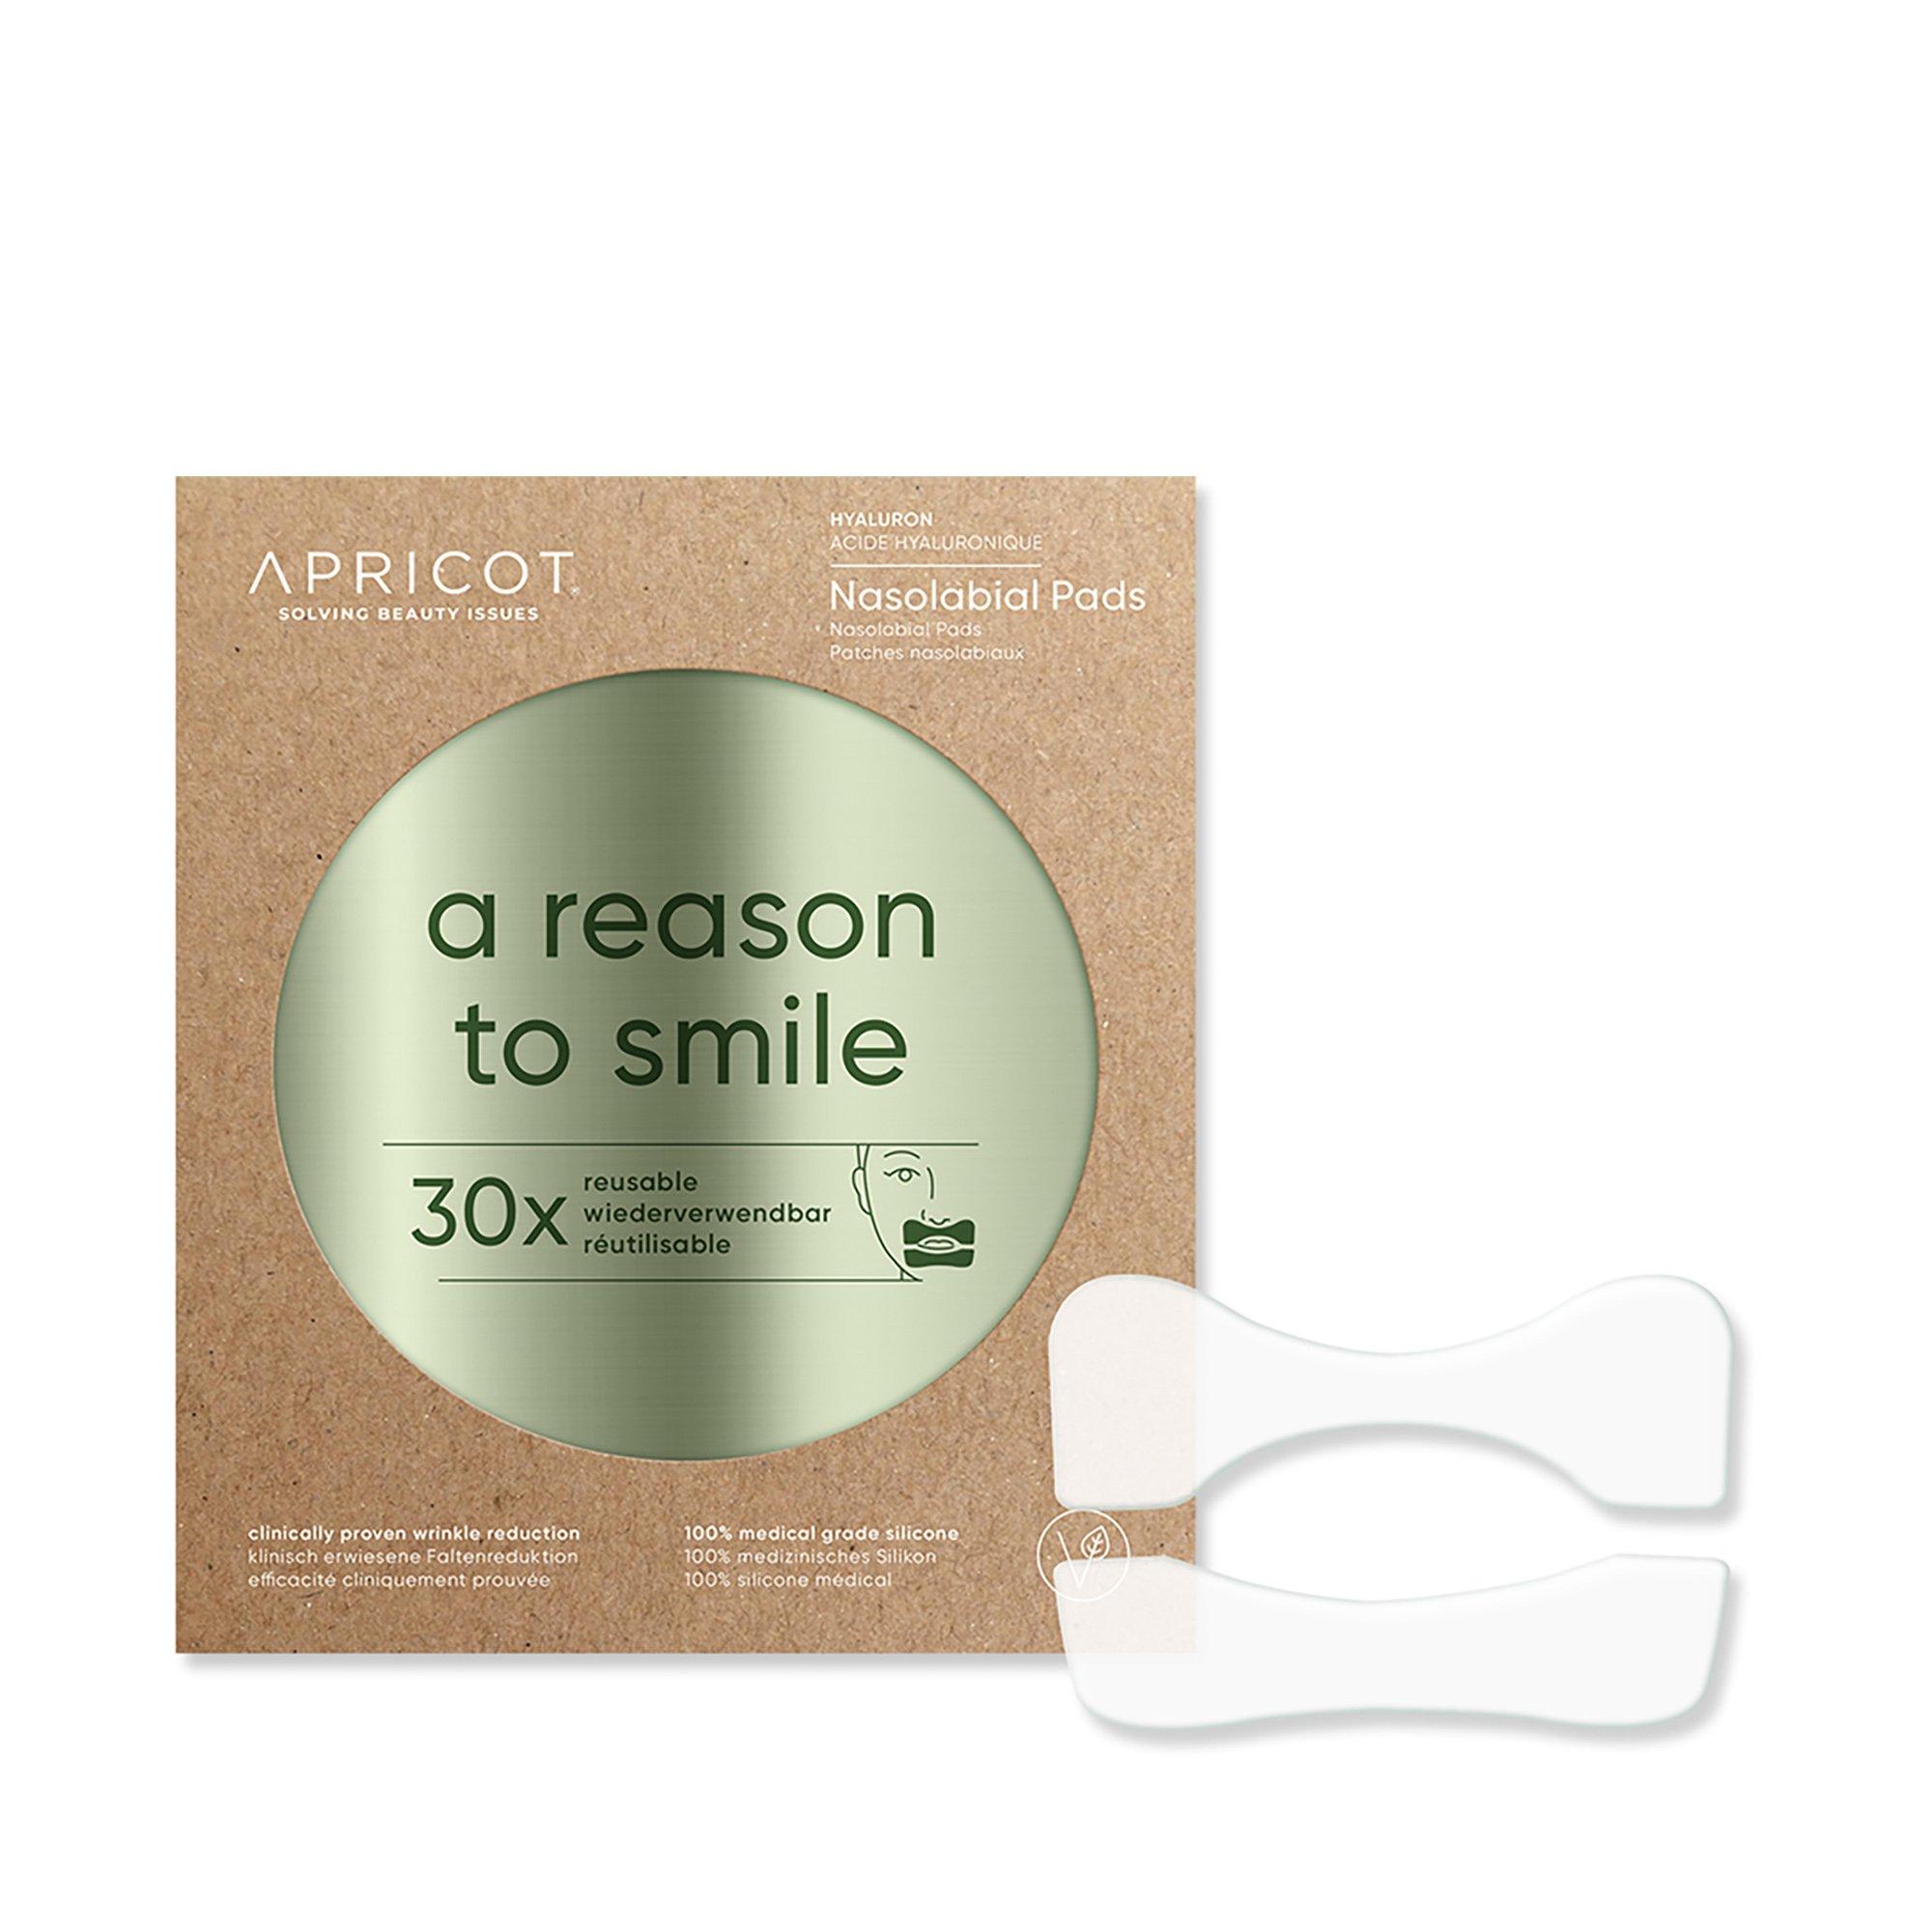 Image of APRICOT Nasolabial Pads Hyaluron "A Reason To Smile" - 2 pezzi